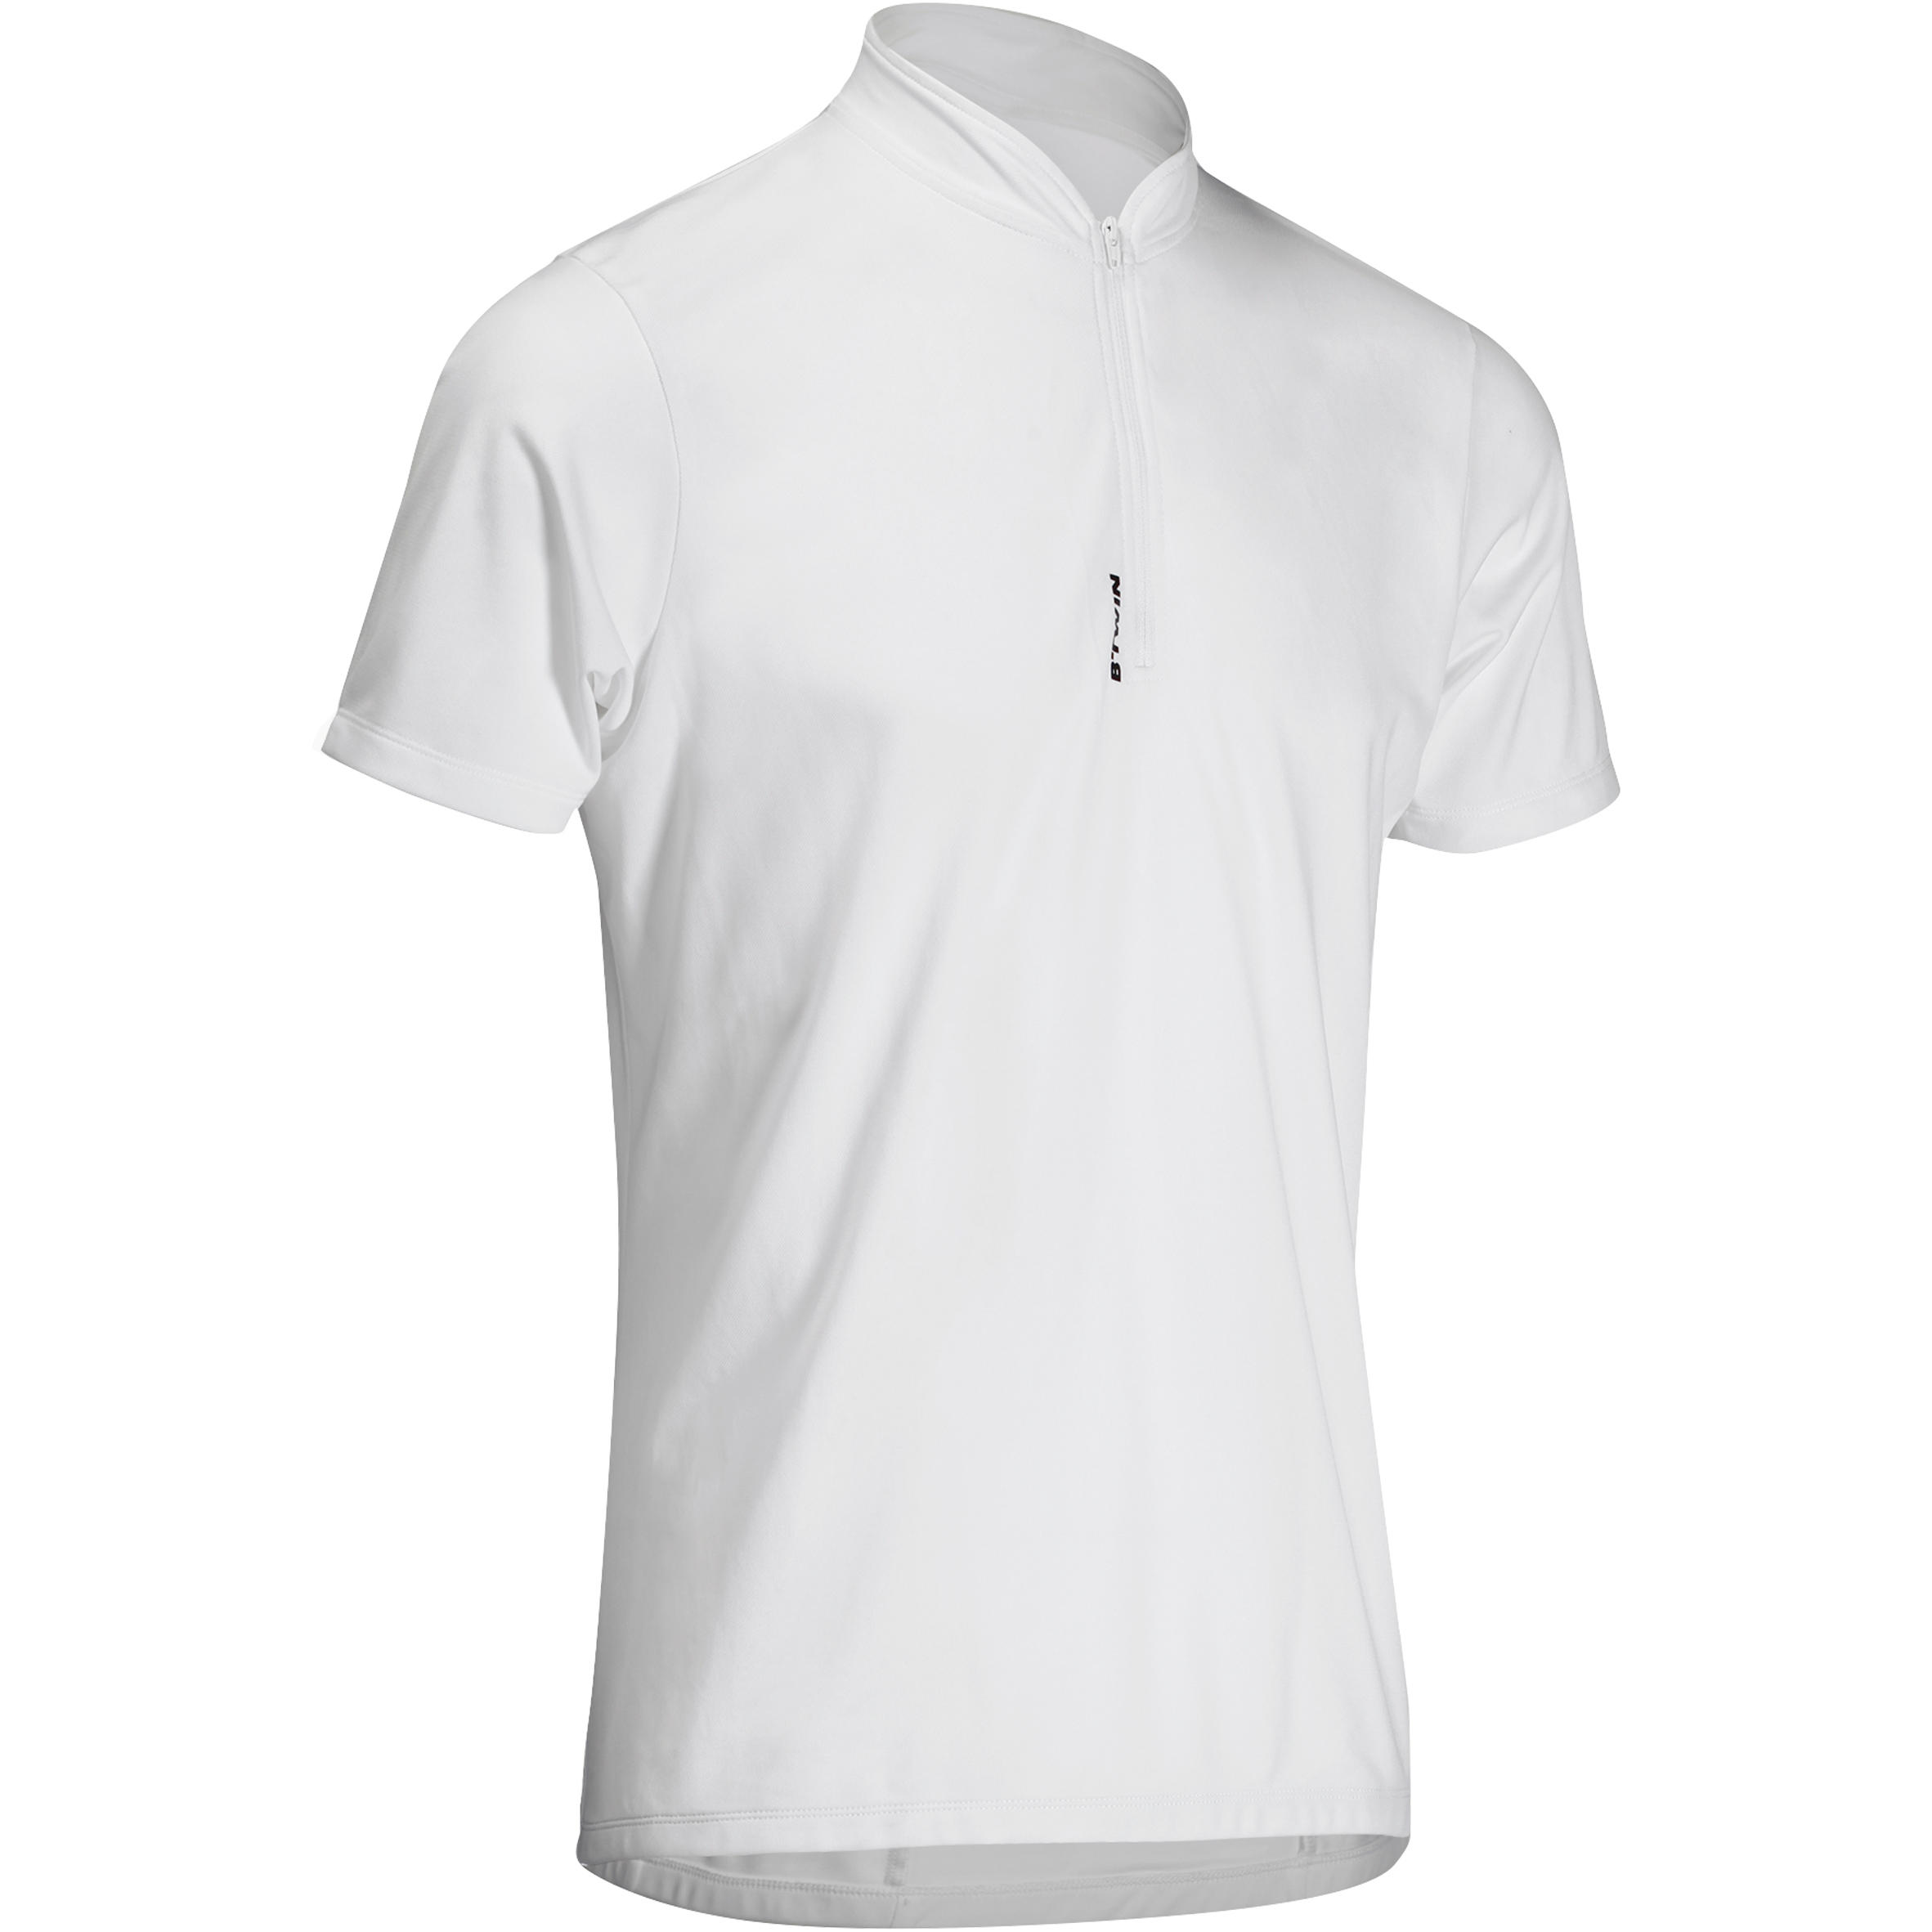 BTWIN Essential Road Cycling Short-Sleeved Jersey - White